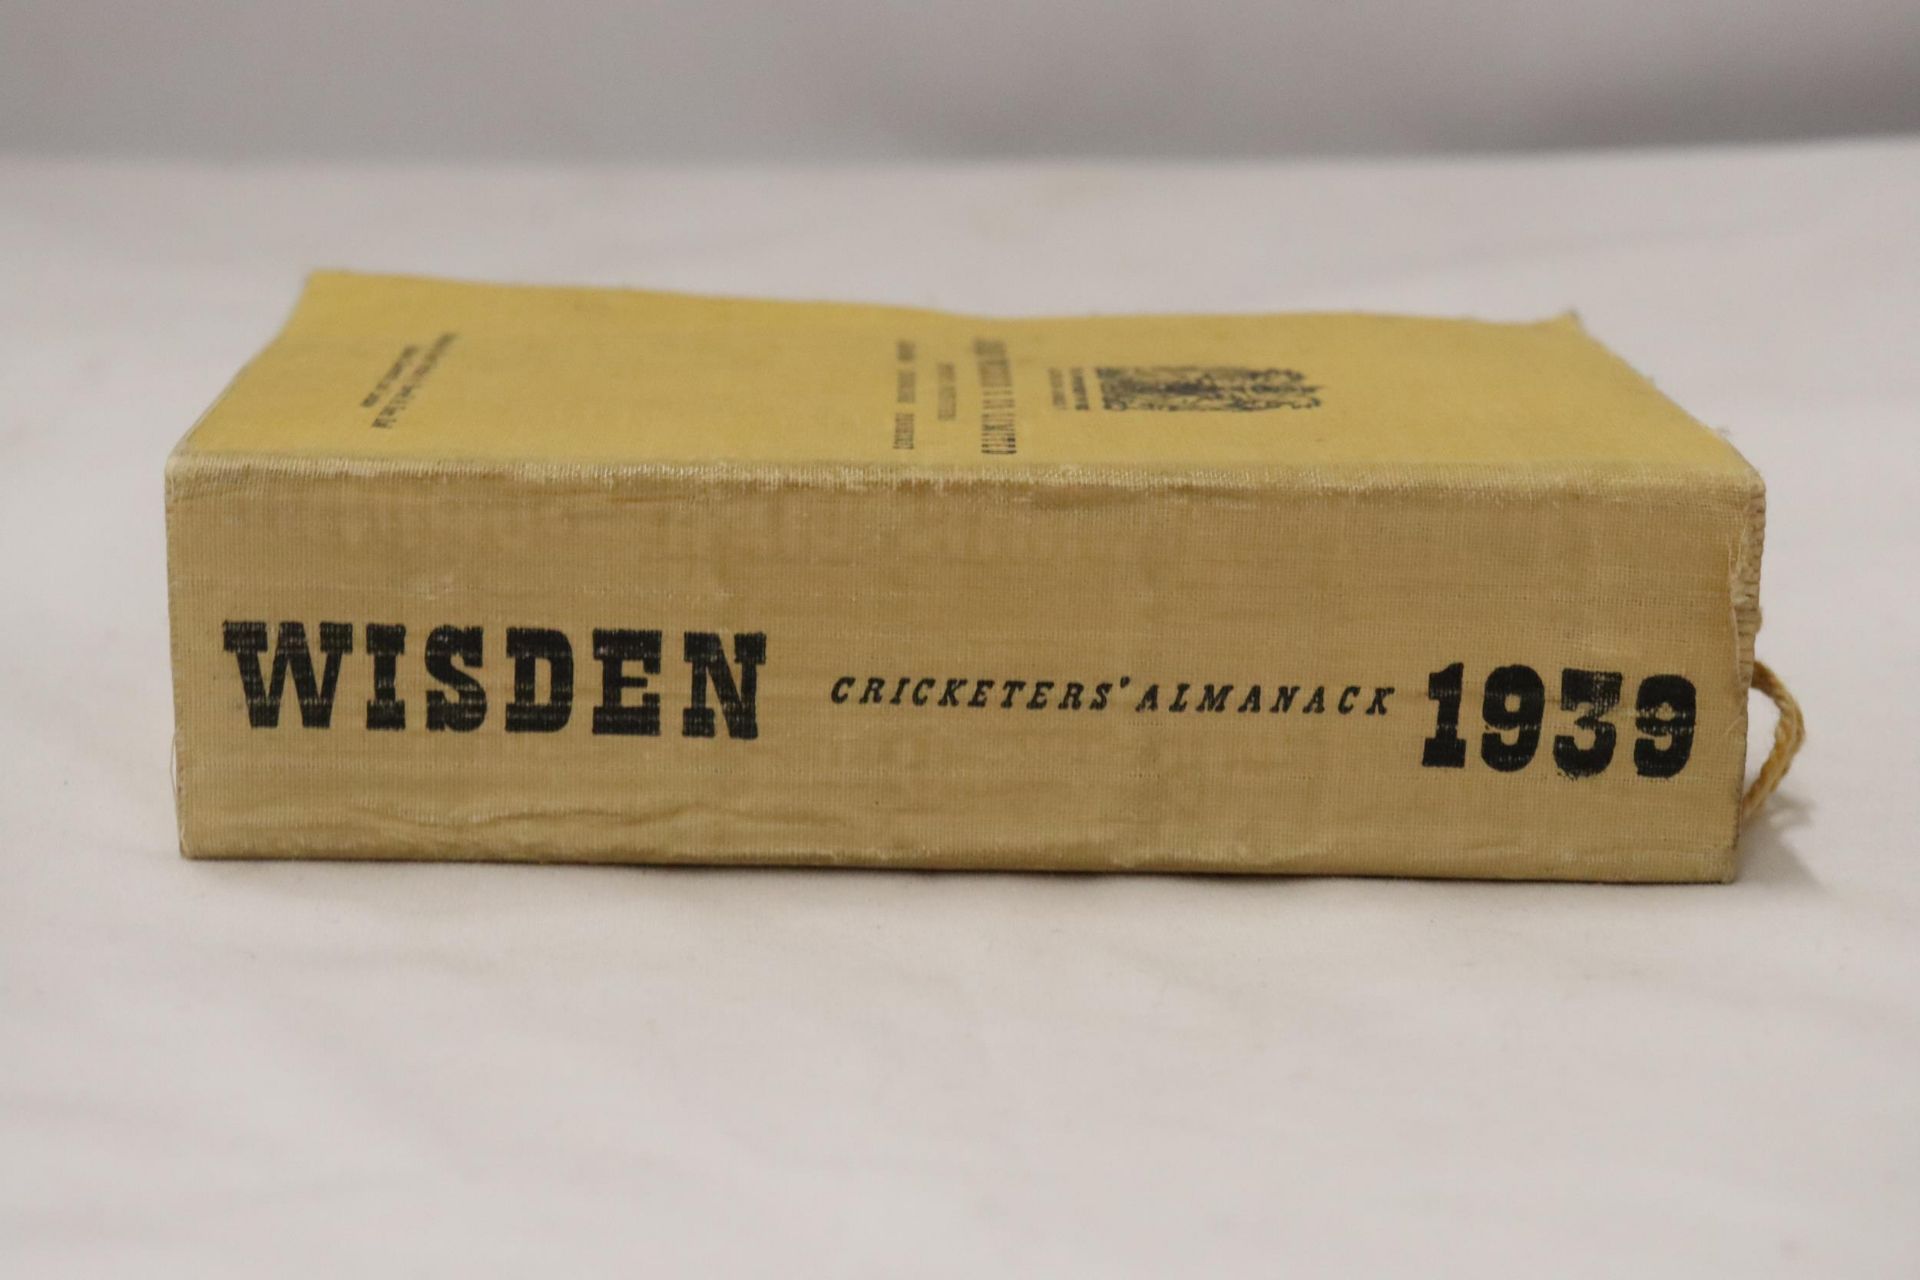 A 1939 COPY OF WISDEN'S CRICKETER'S ALMANACK. THIS COPY IS IN USED CONDITION, THE SPINE IS INTACT. - Image 2 of 5